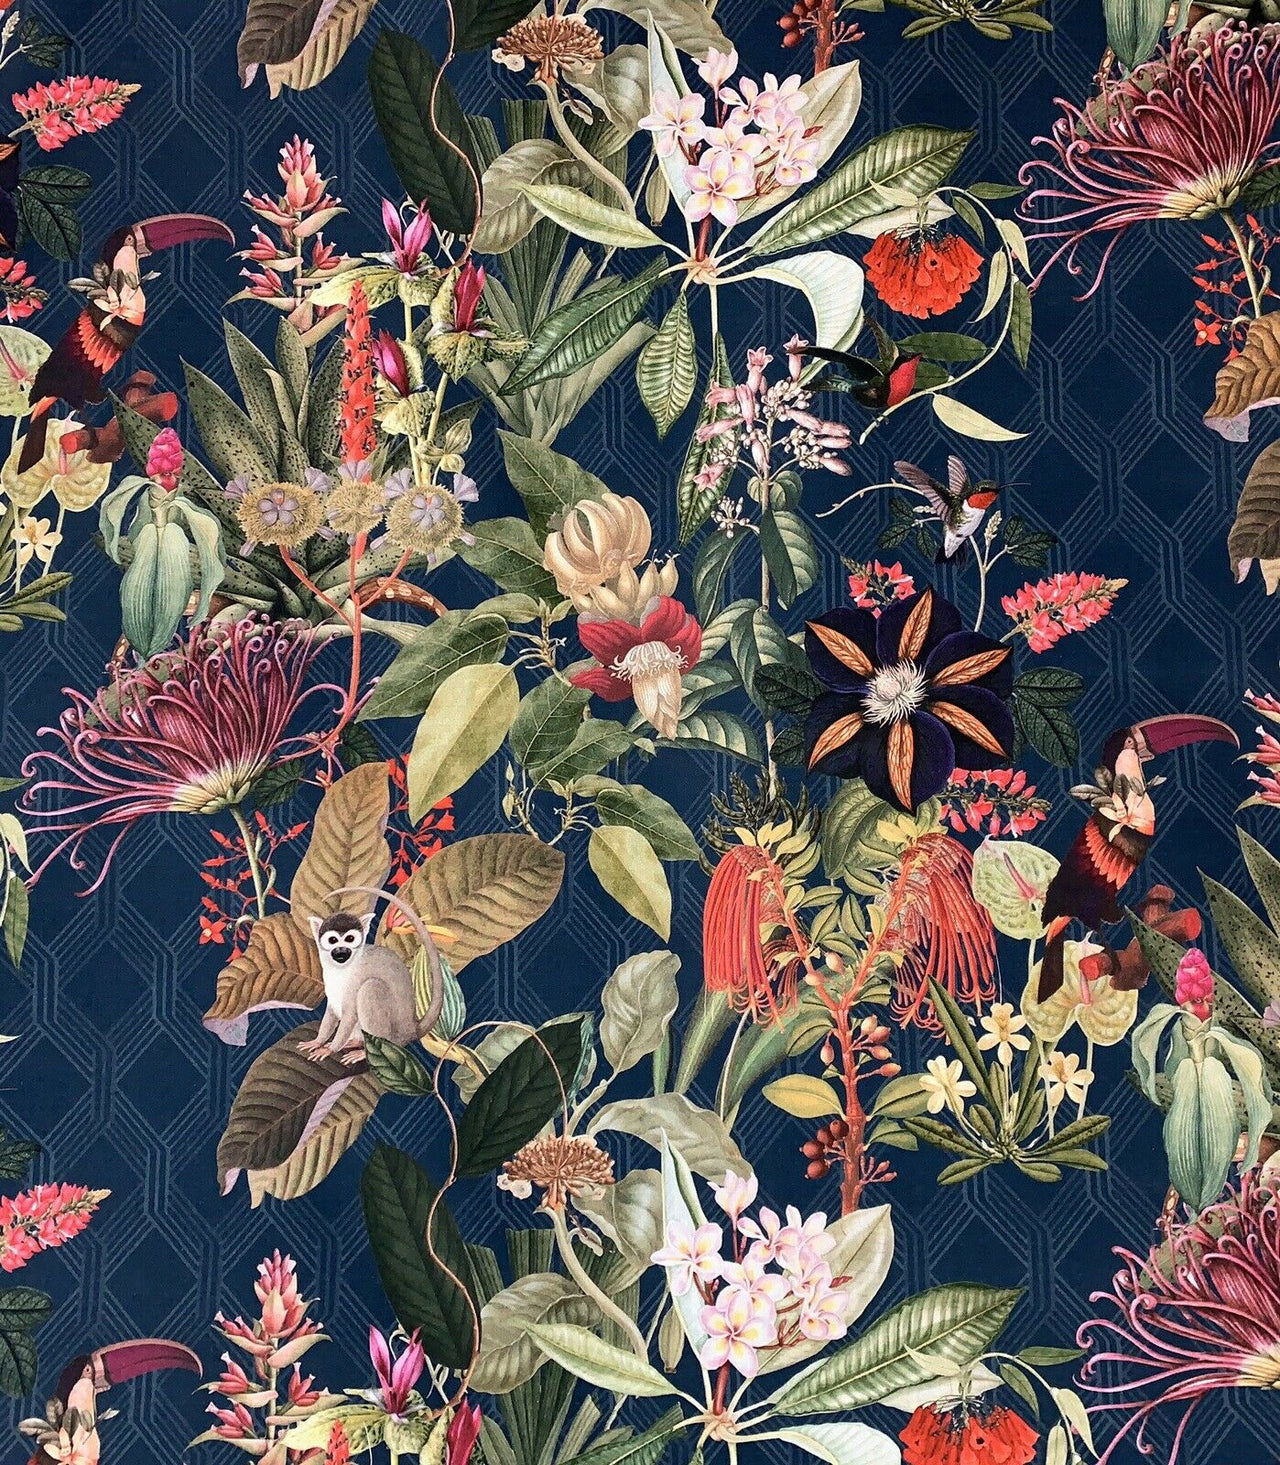 Monkey Toucan Birds Cotton Fabric By The Meter Blue Sewing Material Tropical Floral Textile For Pillows Cushions Crafts